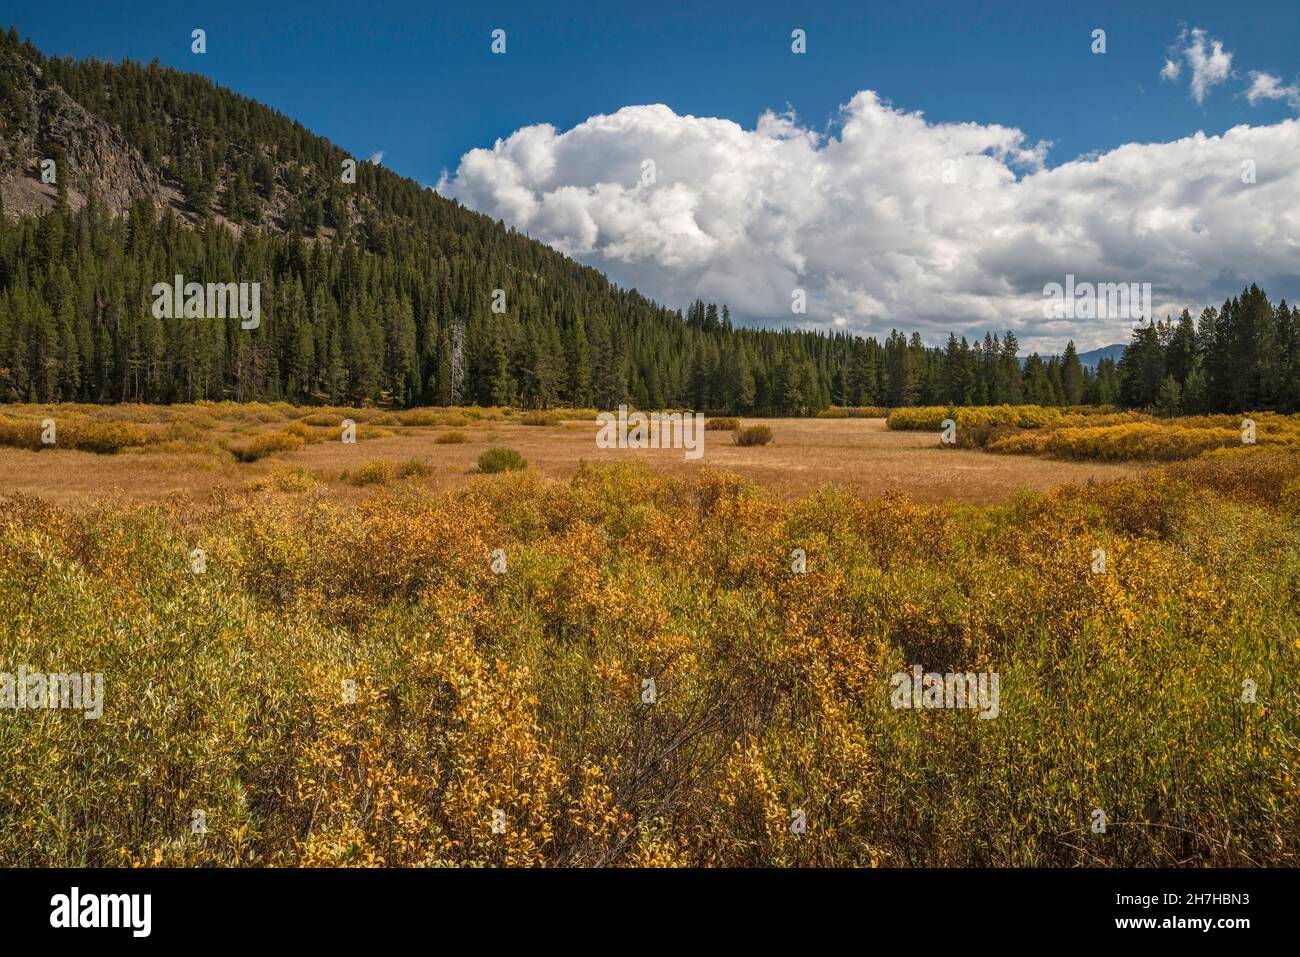 Fall color willow shrubs in wet meadow, Glade Creek valley, Grassy Lake Road, John D. Rockefeller Memorial Parkway protected area, Wyoming, USA Stock Photo